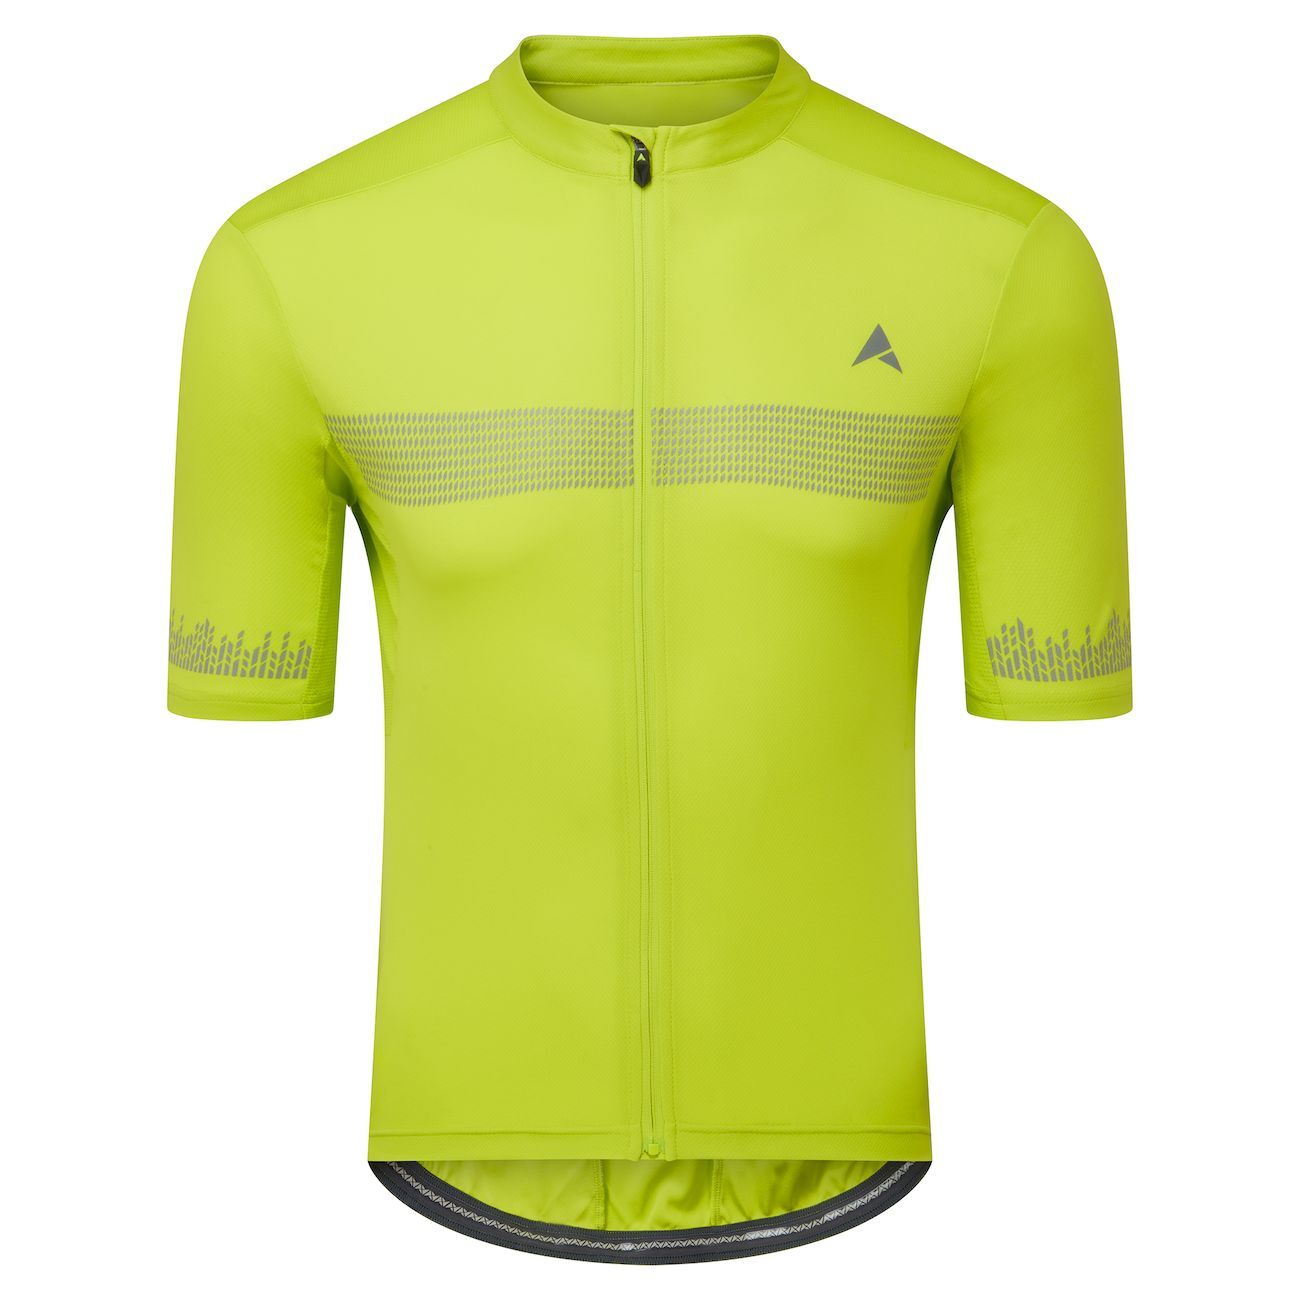 Altura Maillot Manches Courtes Nightvision - Cykeljersey